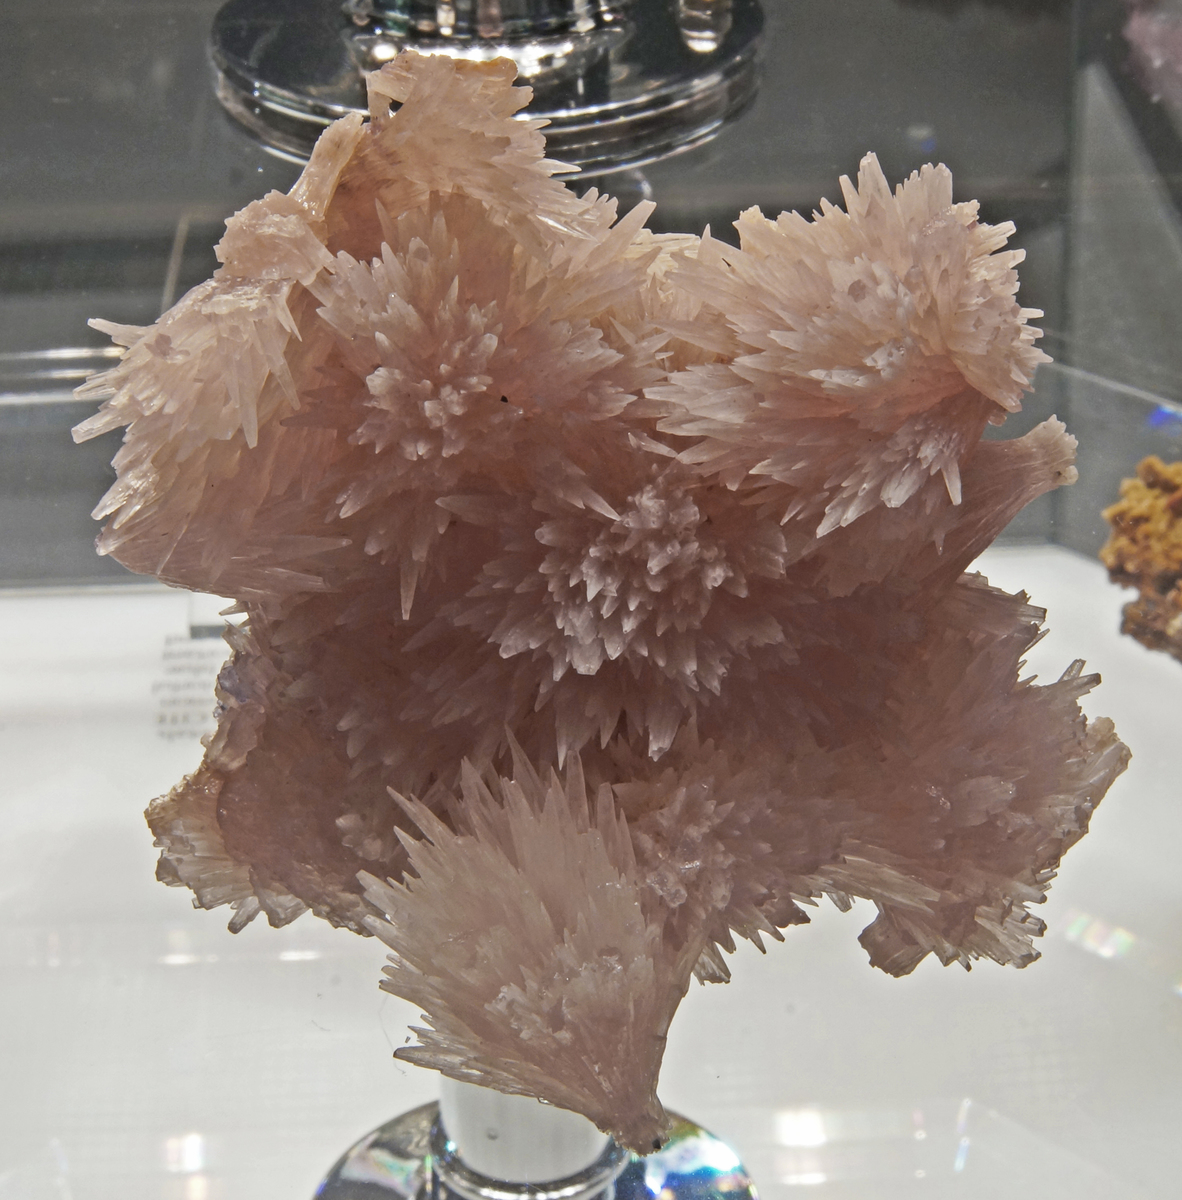 Acicular crystals of strontianite from Illinois